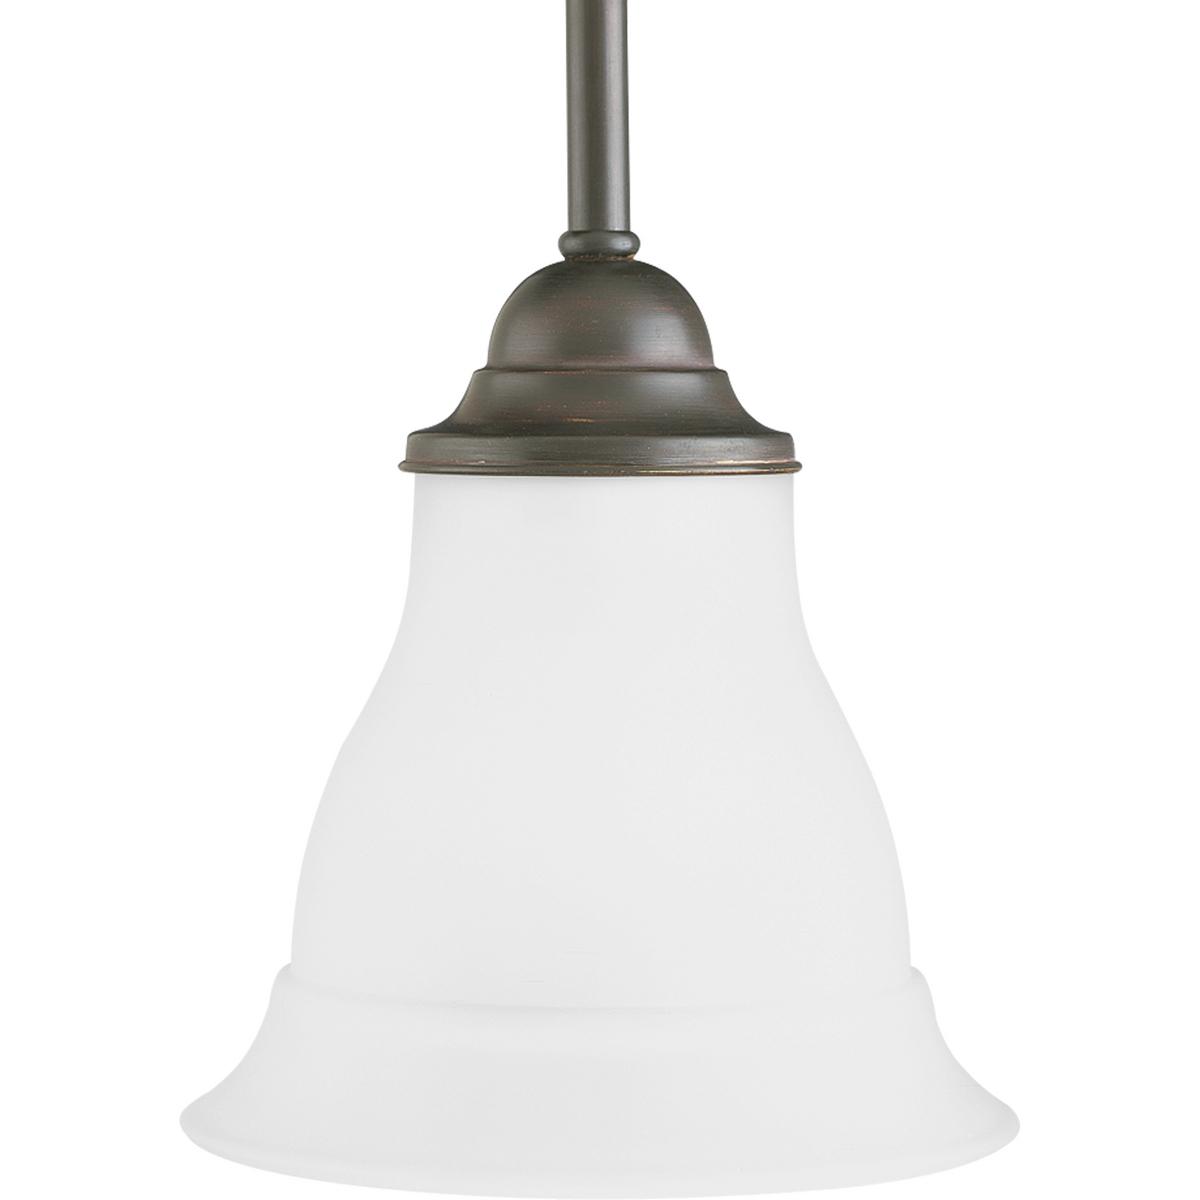 Hubbell P5096-20 One-light mini-pendant featuring soft angles, curving lines and etched glass shades. Gracefully exotic, the Trinity Collection offers classic sophistication for transitional interiors. Sculptural forms of metal and glass are enhanced by a classic finish. 